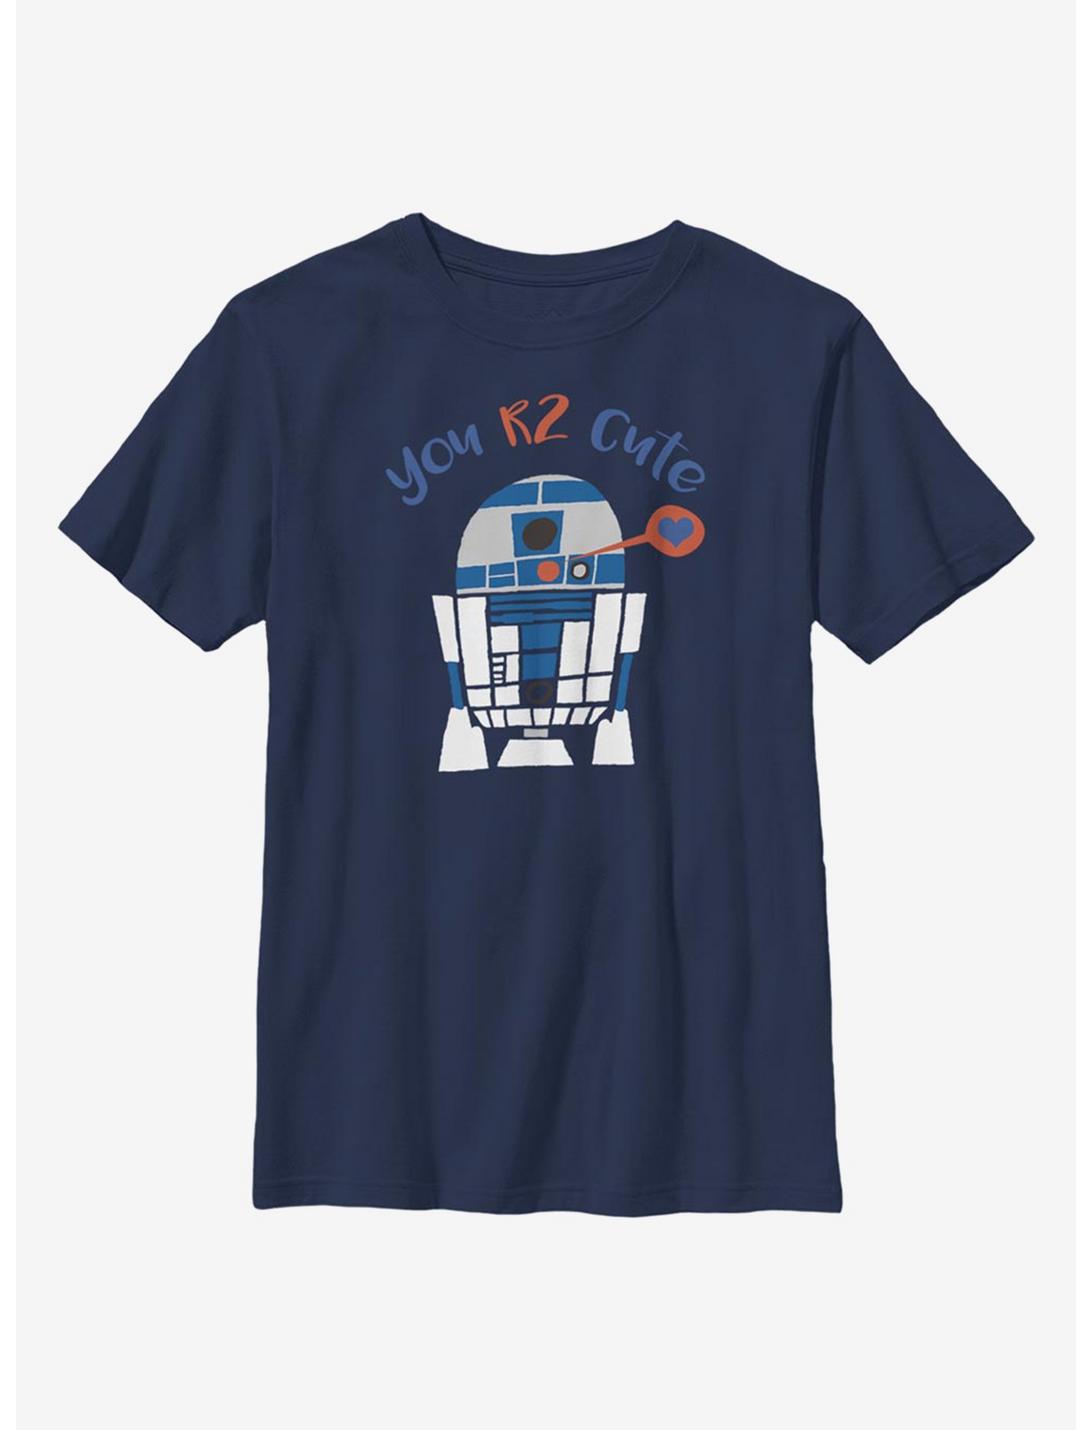 Star Wars Are Too Cute Youth T-Shirt, NAVY, hi-res